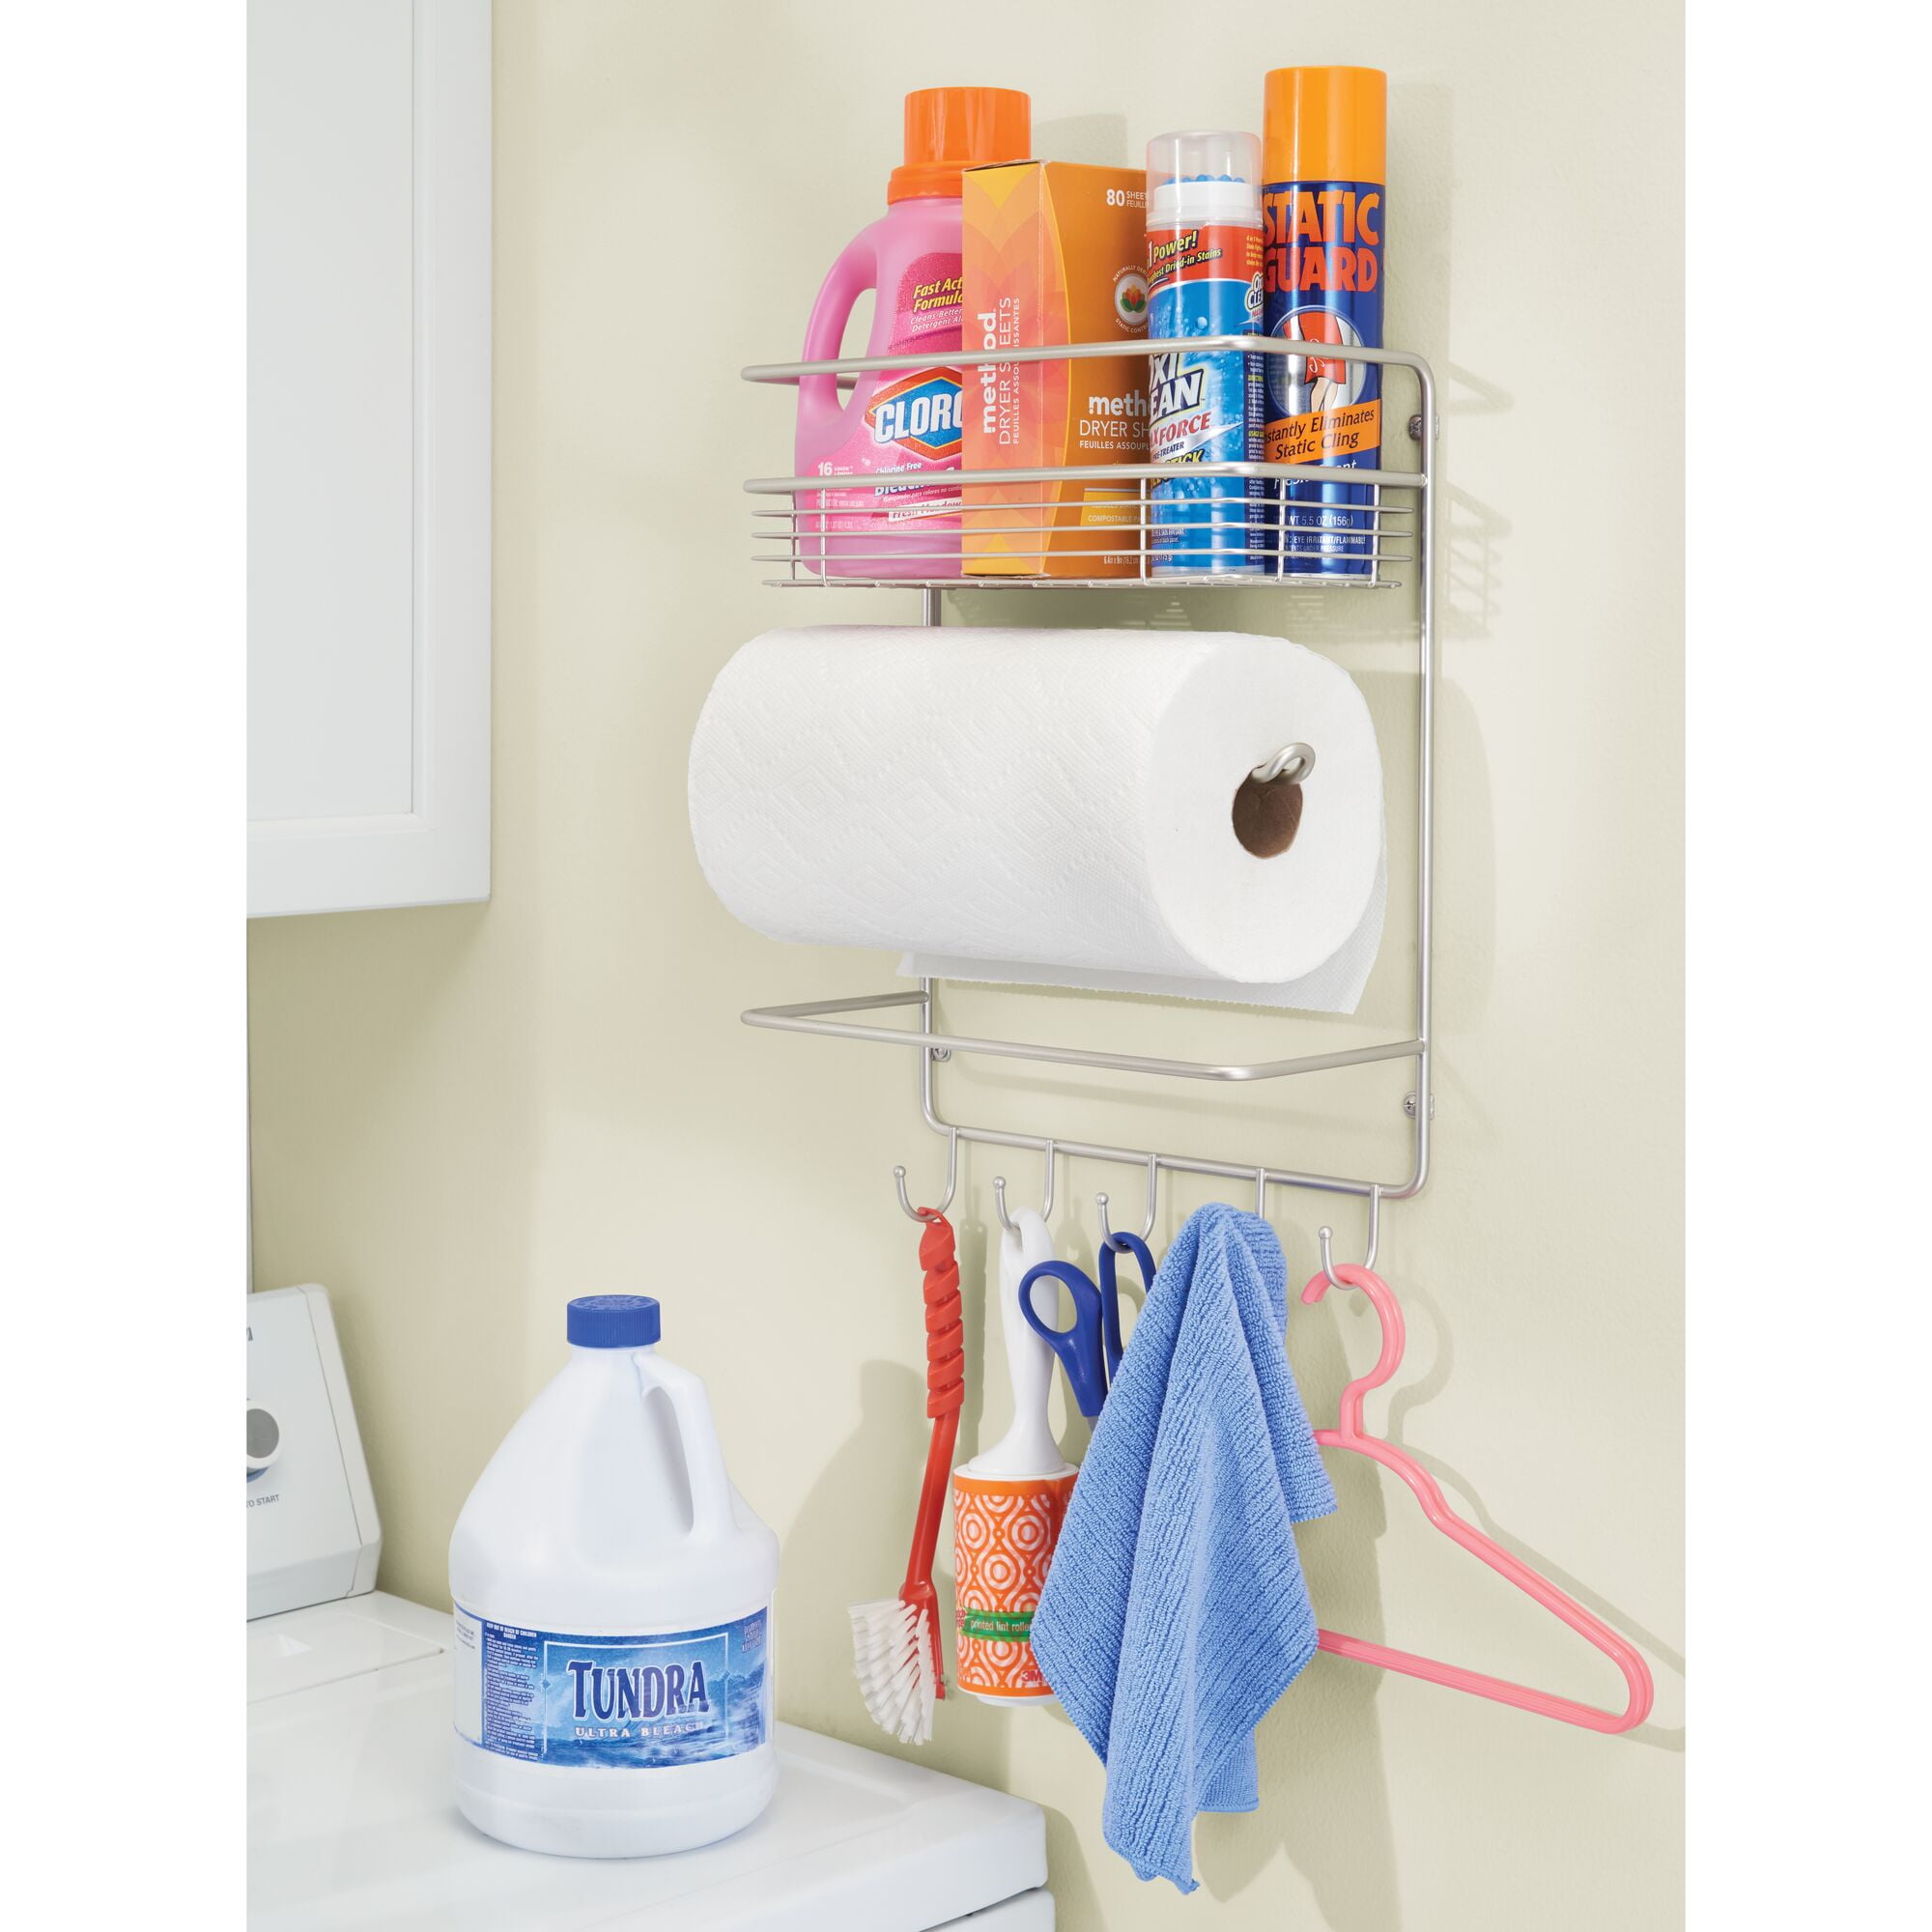 Grapevine Wall Mount Paper Towel Holder